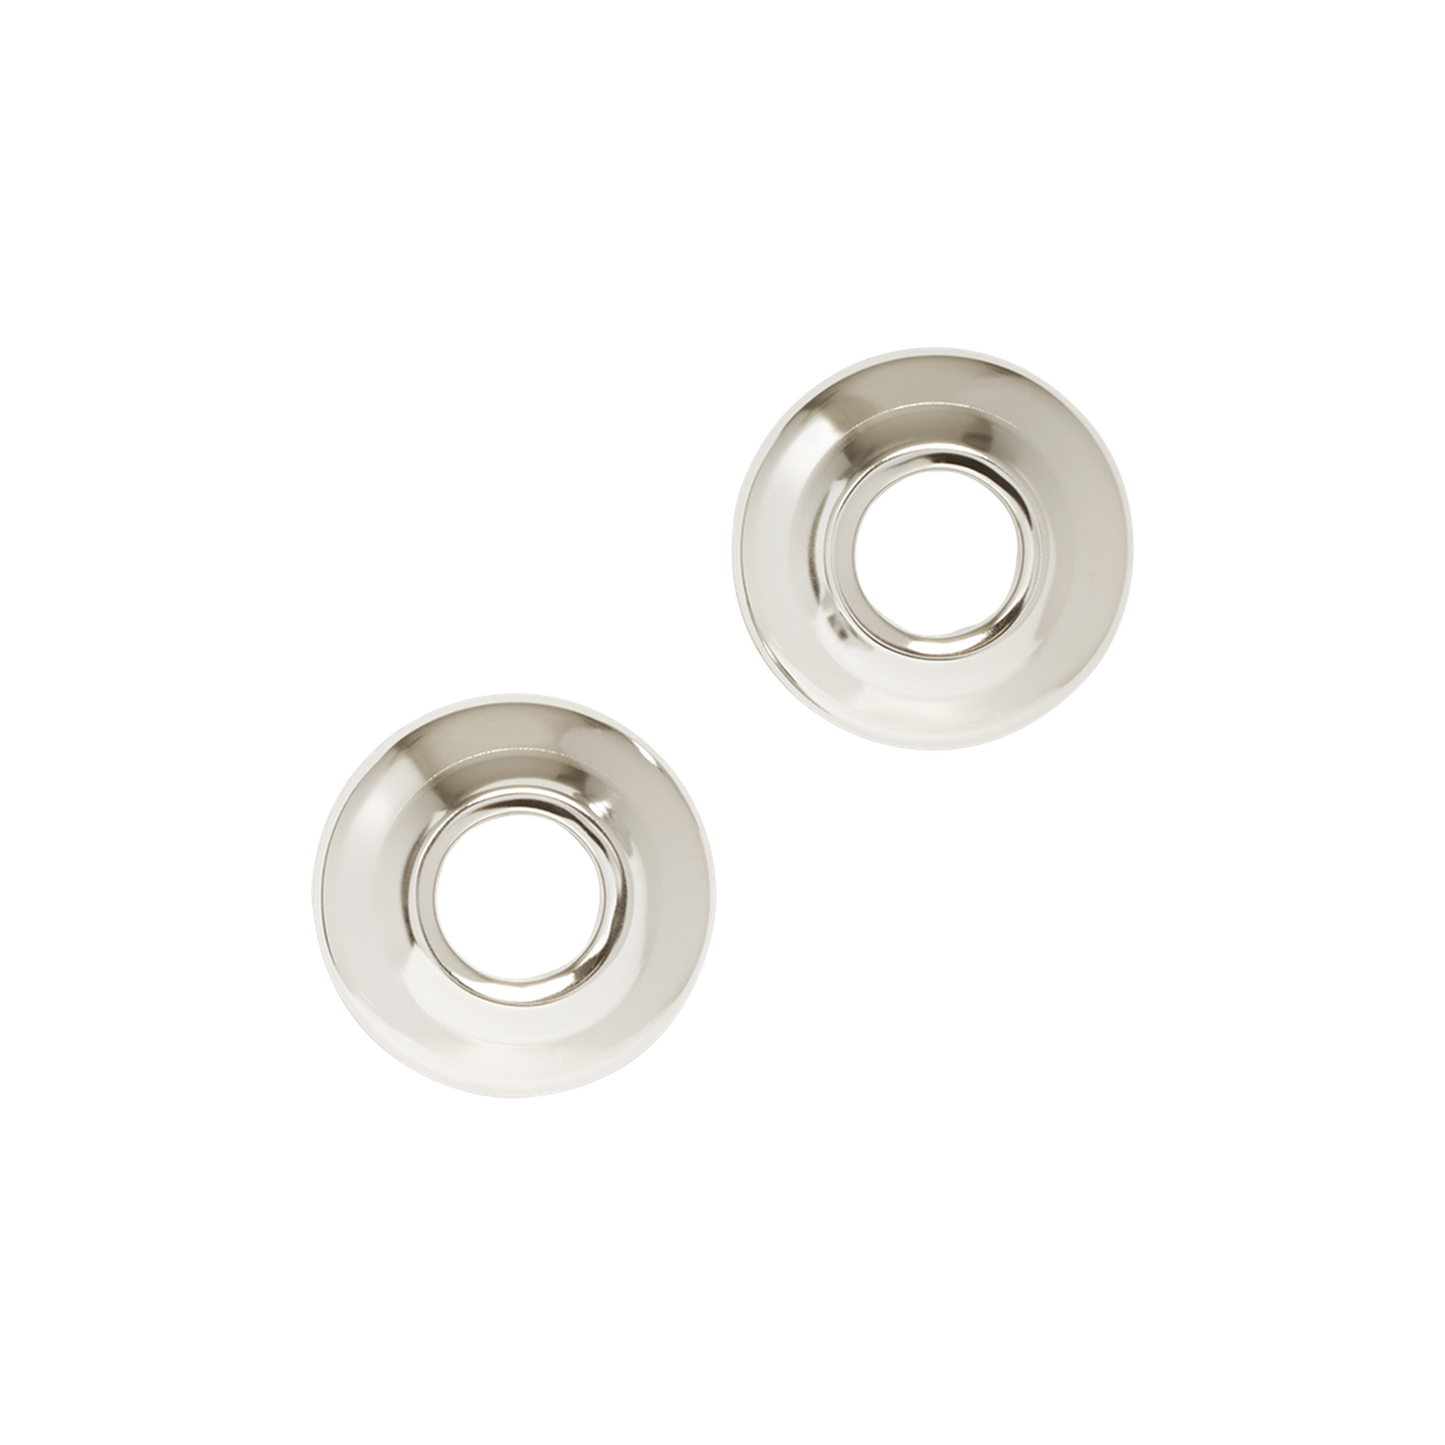 Seachrome Signature Series 2.5" Diameter Polished Stainless Steel Concealed Mounting Flange and Bracket Set for Shower Rod